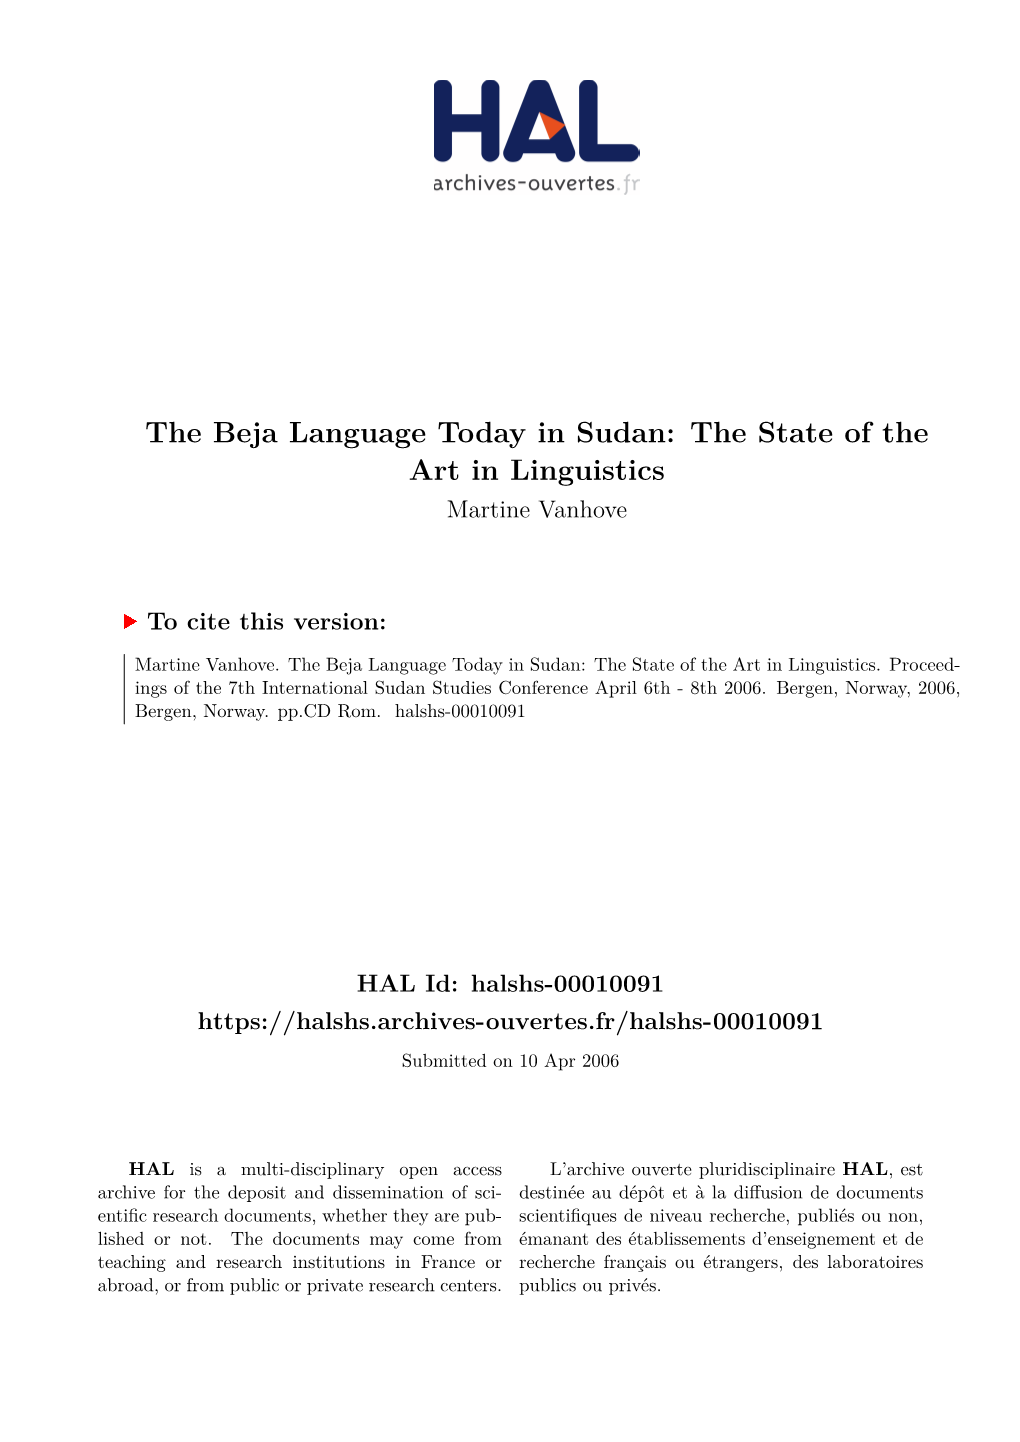 The Beja Language Today in Sudan: the State of the Art in Linguistics Martine Vanhove